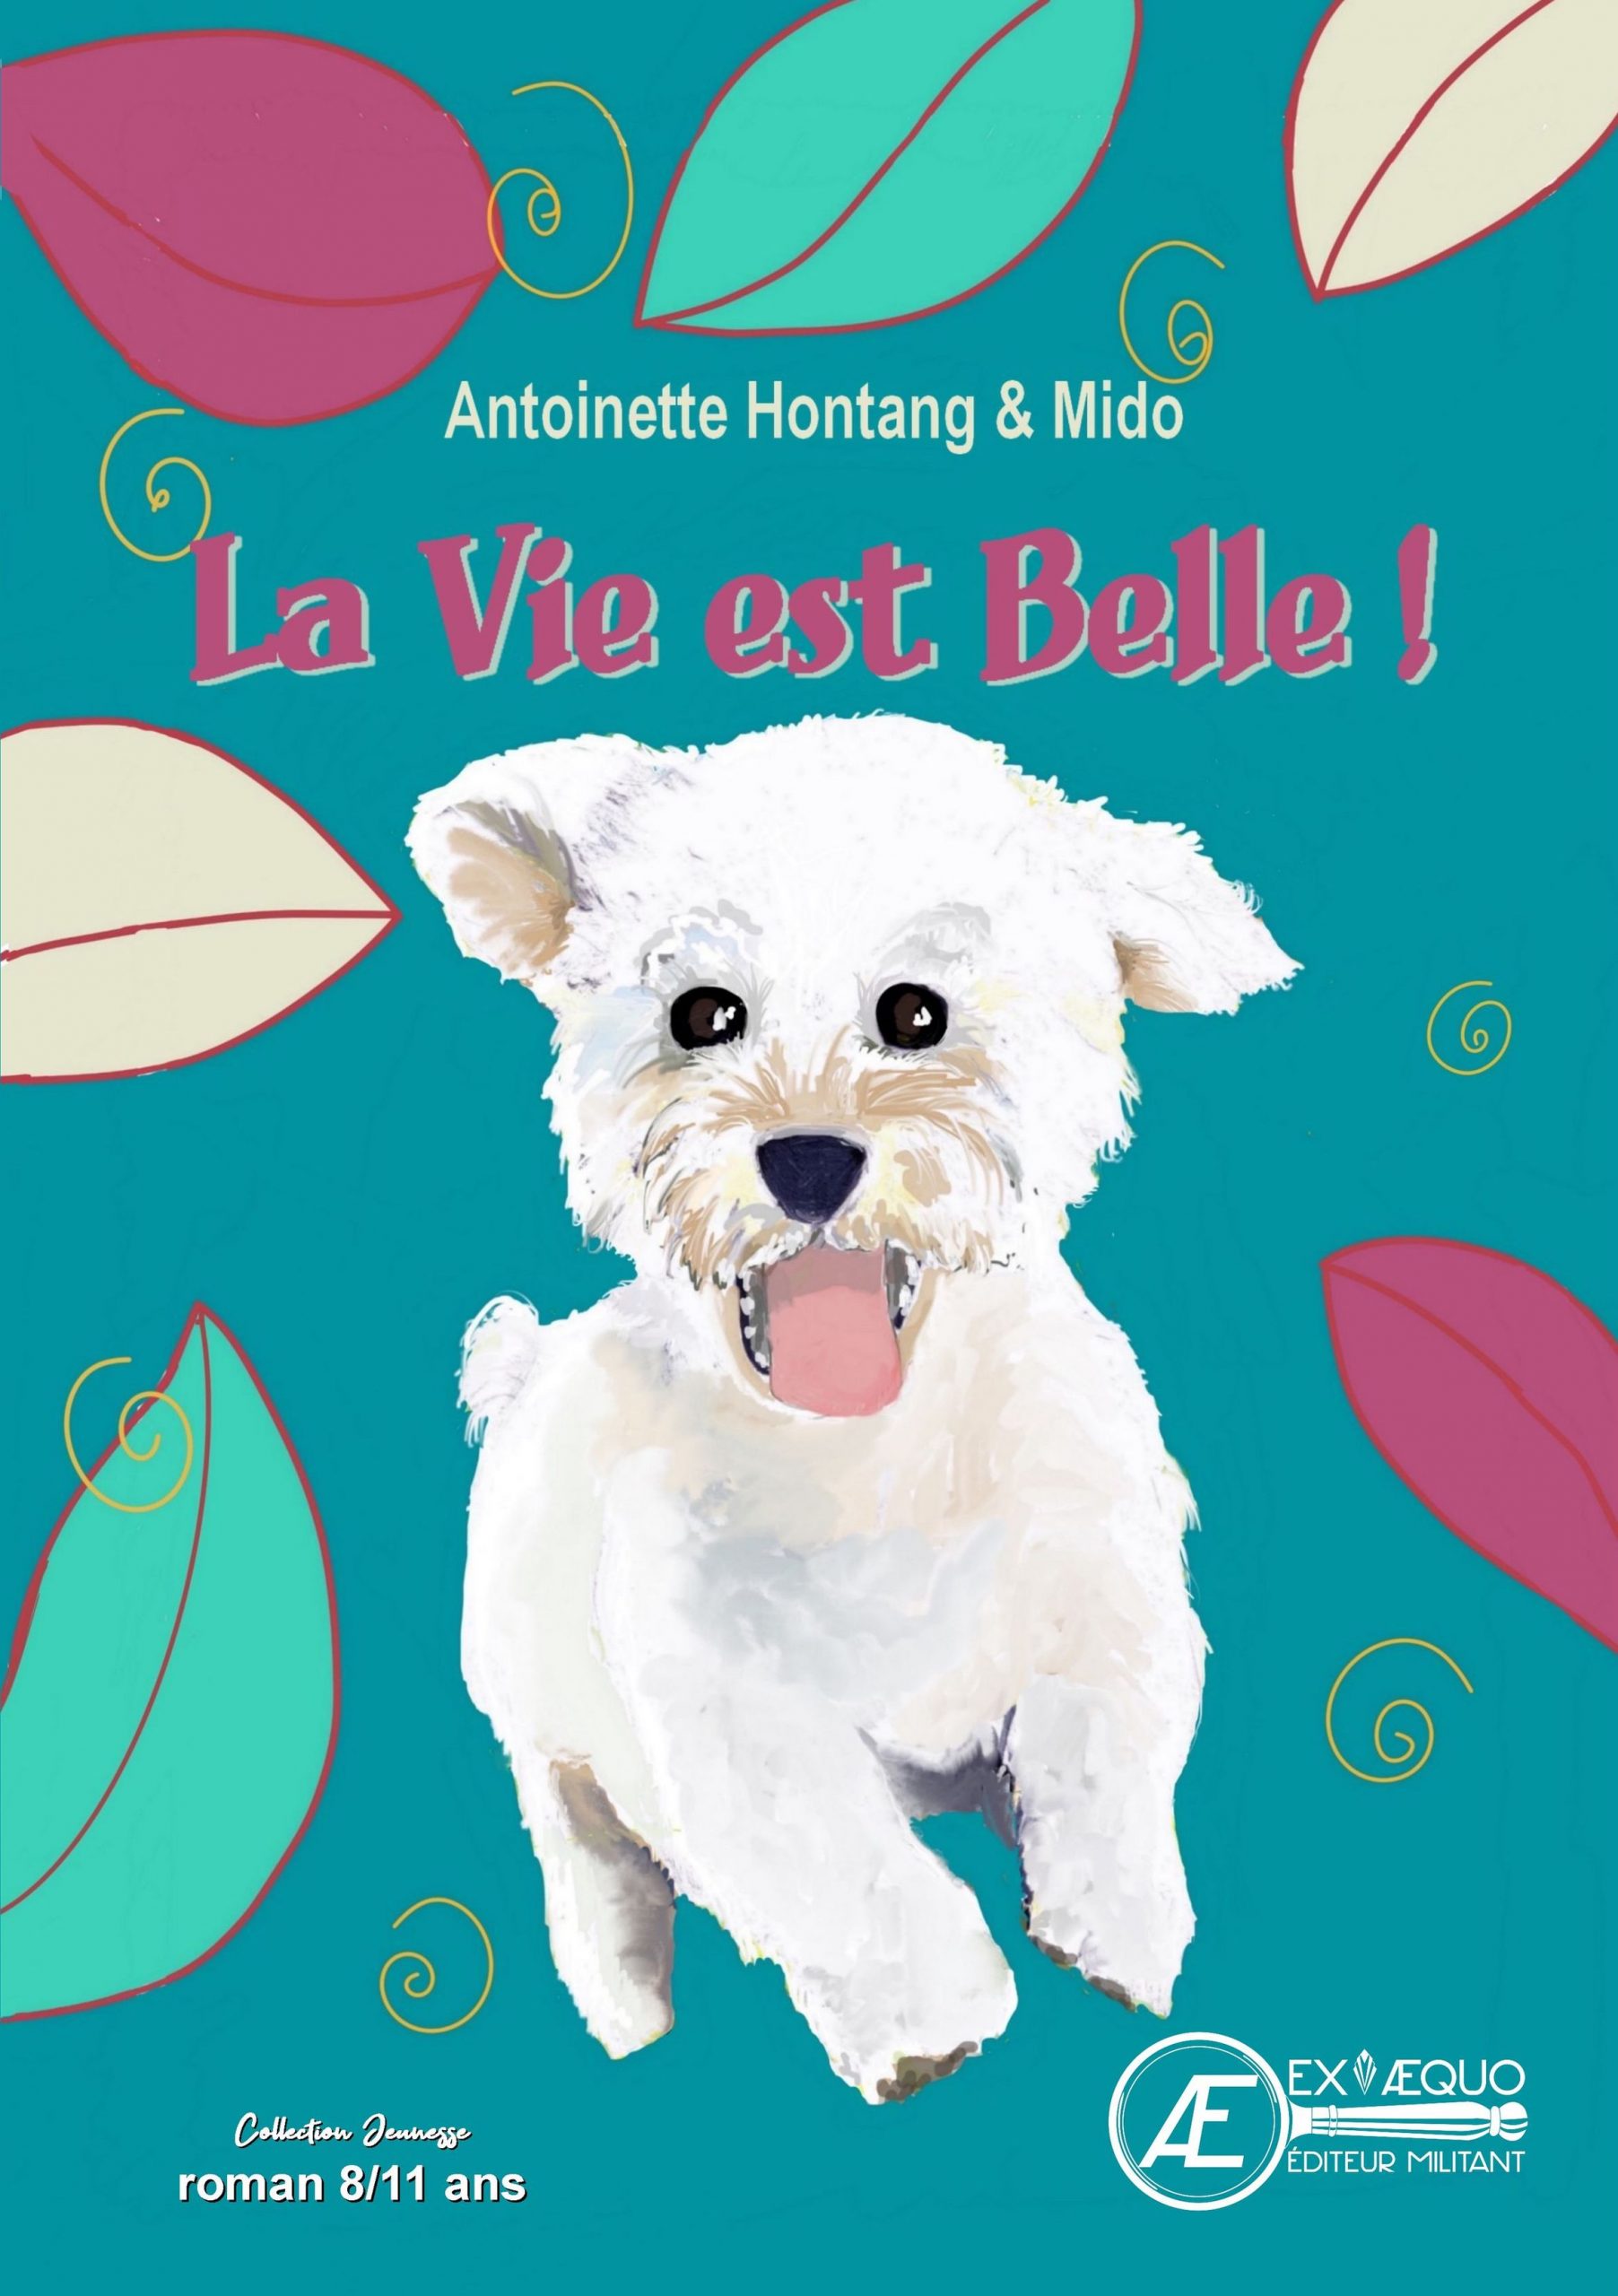 You are currently viewing La vie est belle, d’Antoinette Hontang & MIDO